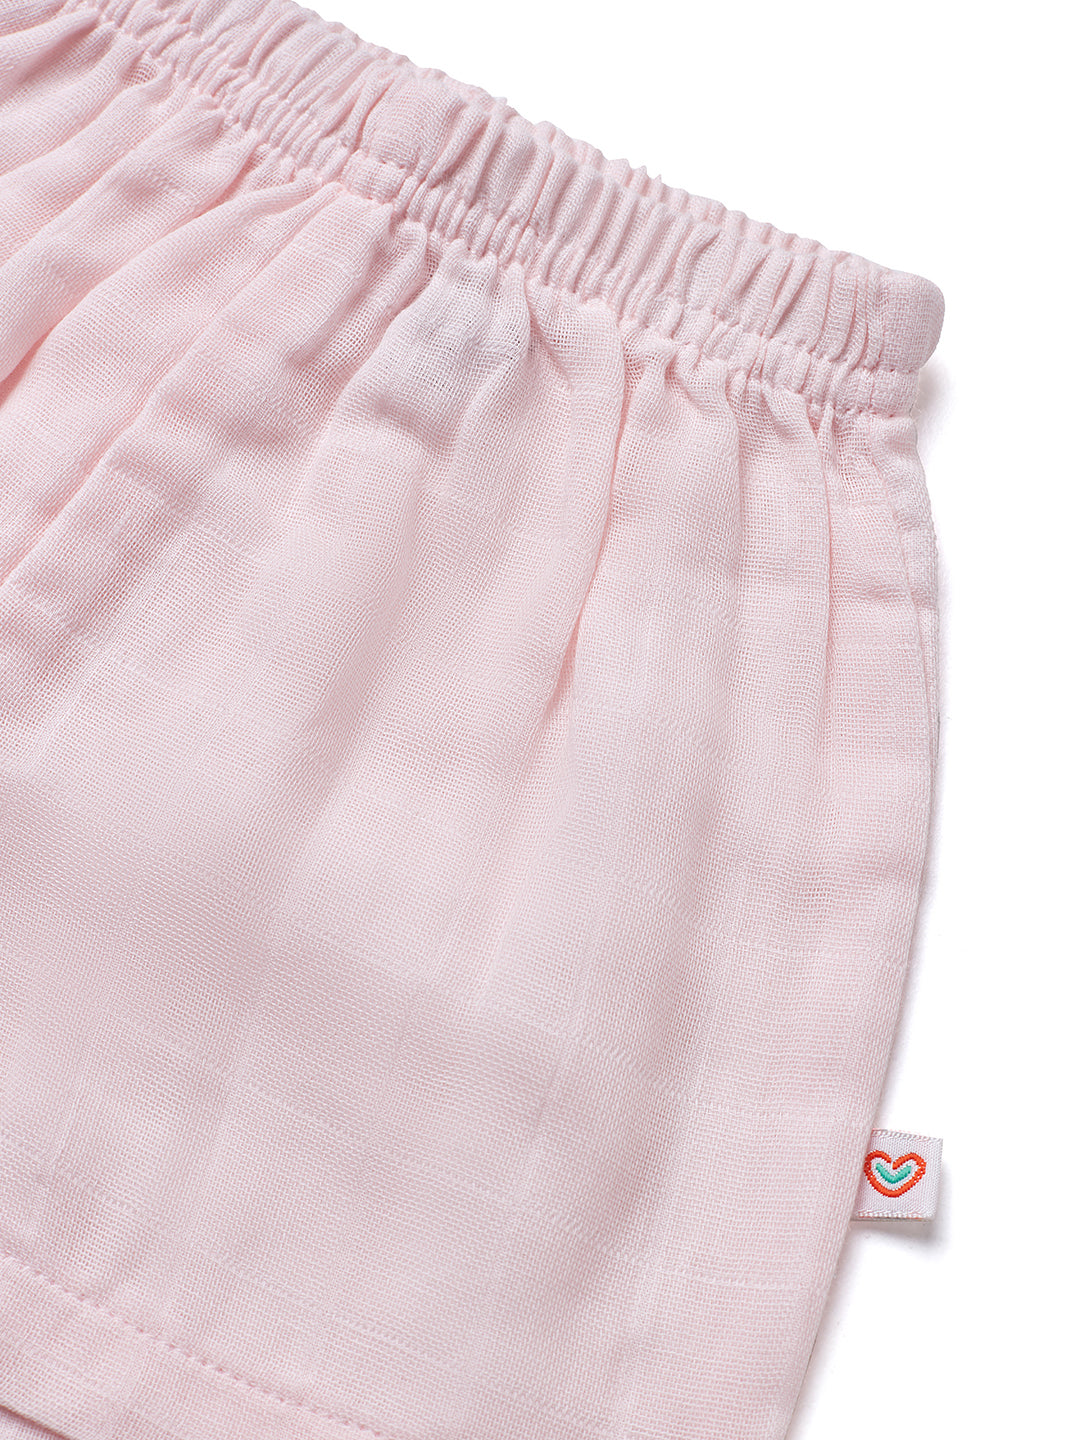 Nuberry New Born Organic Cotton Muslin Shorts Set Pack of 3